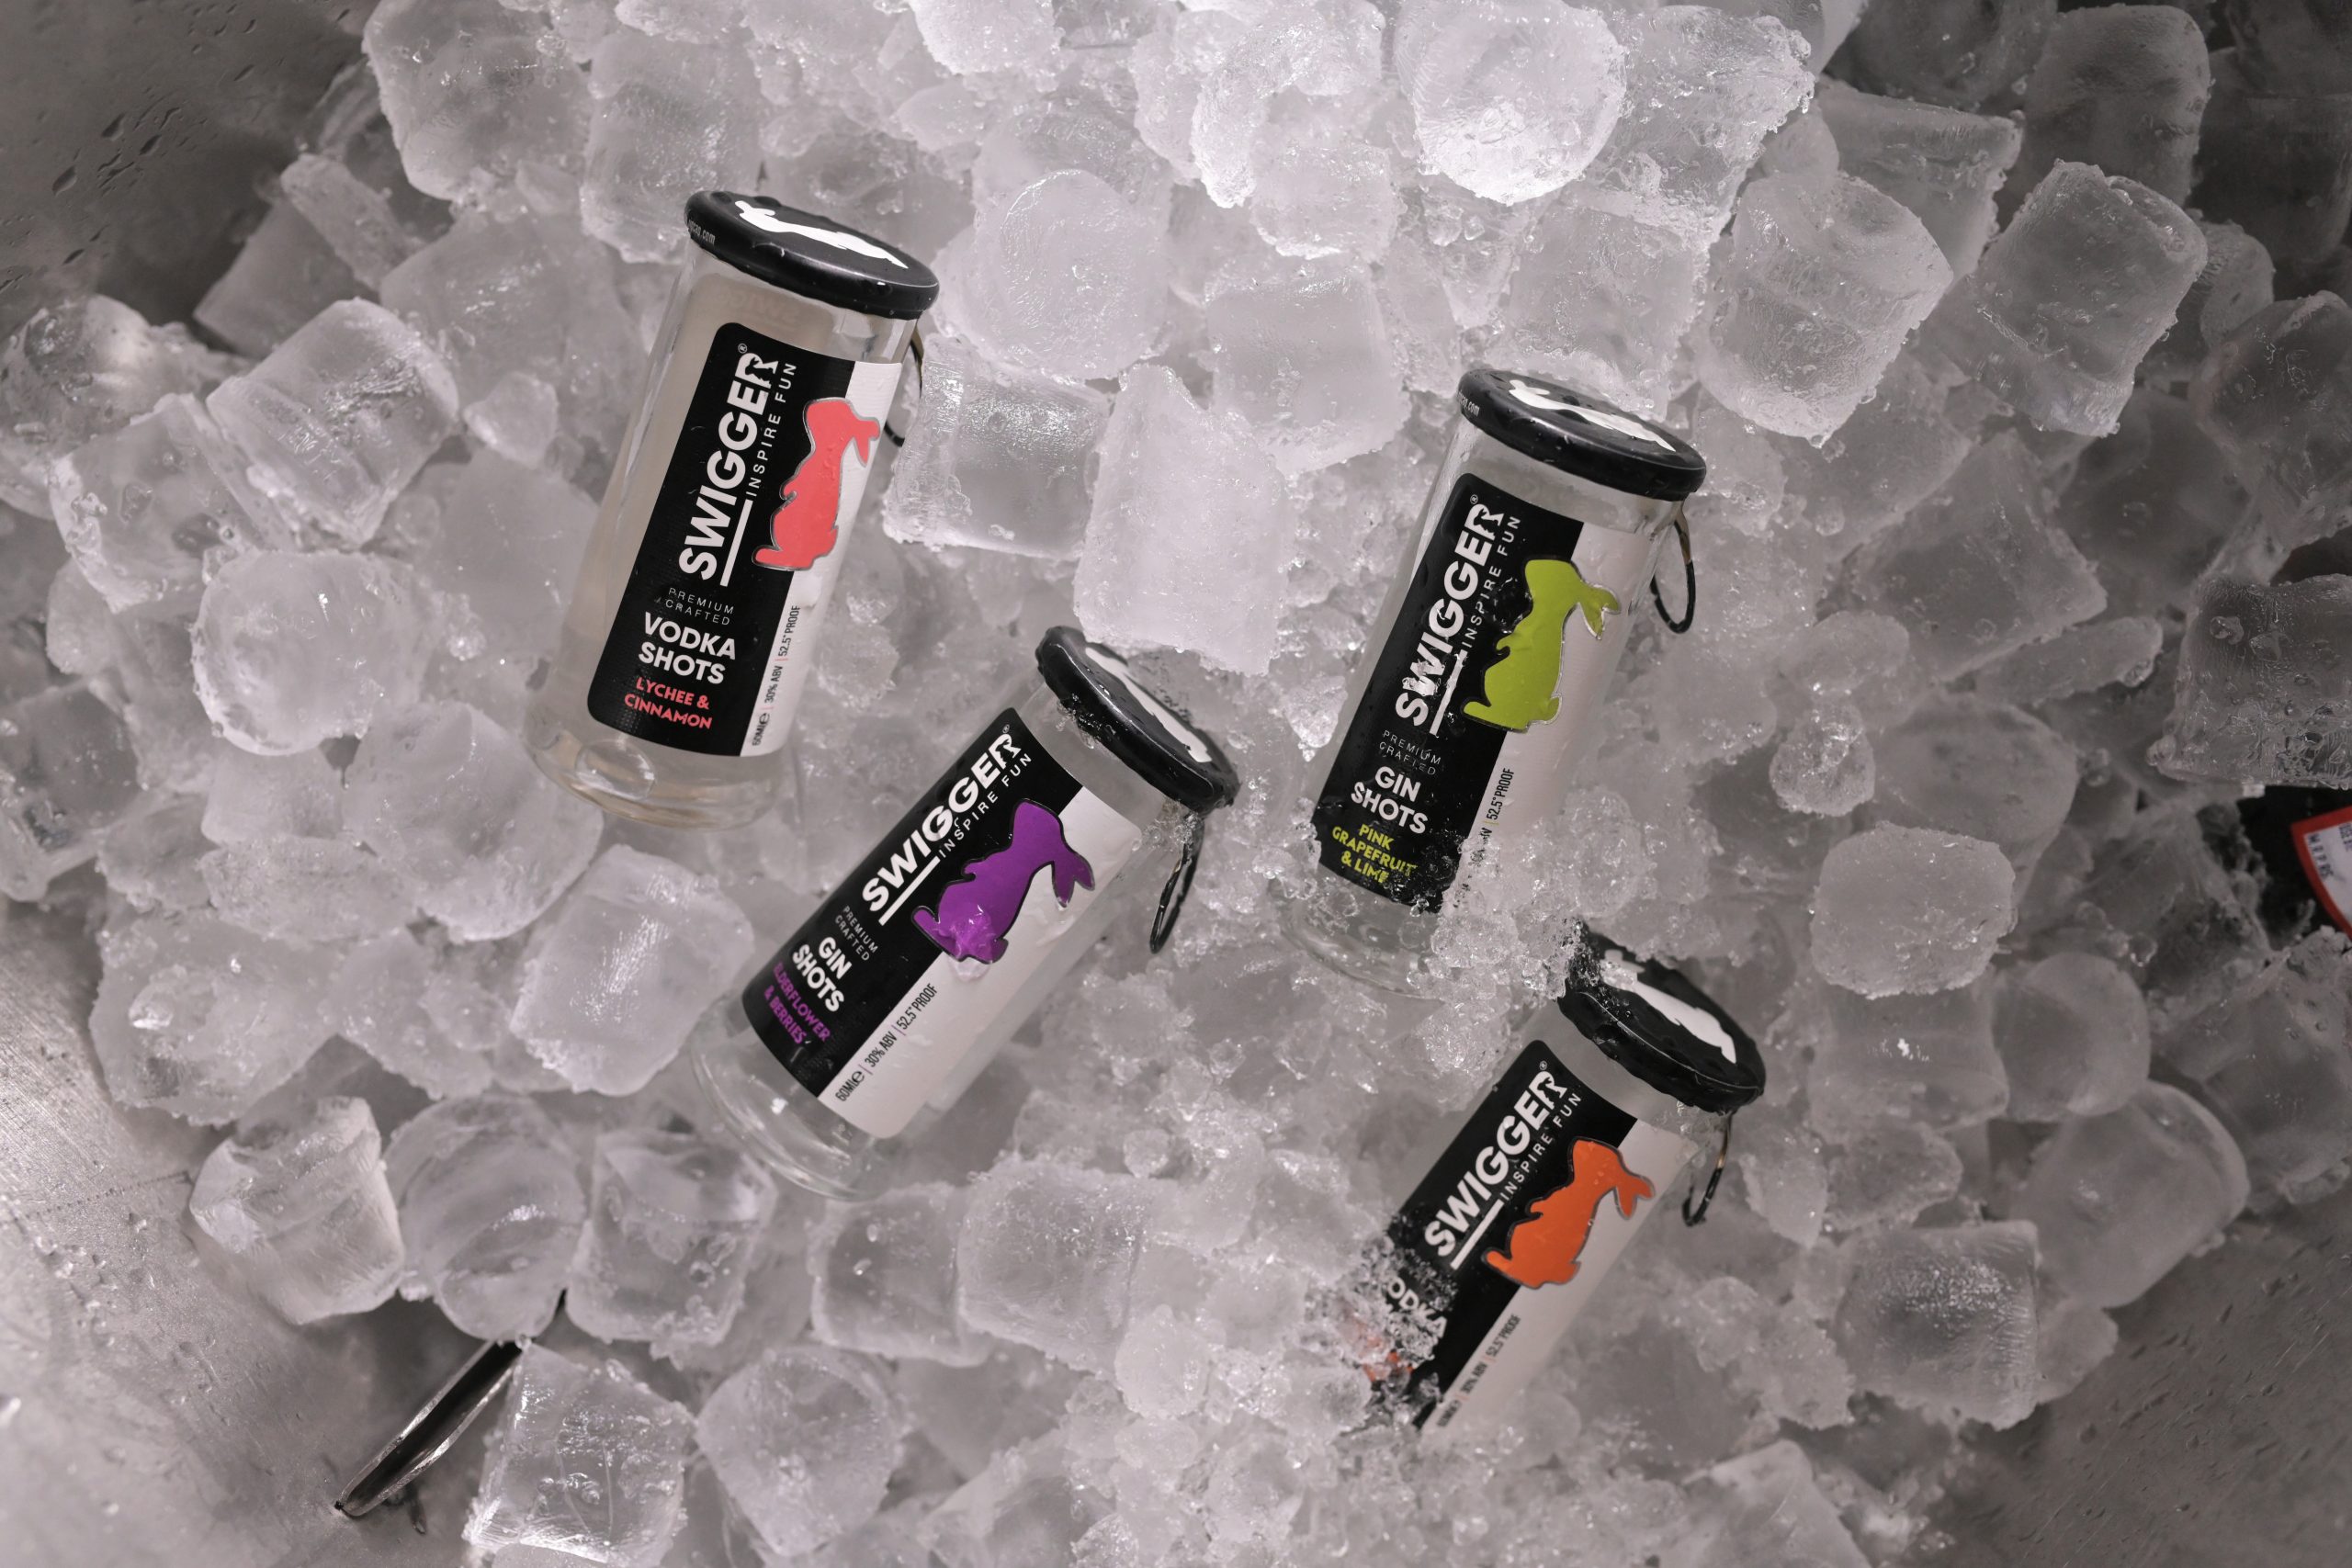 India’s First Spirits-Based Ready-to-Drink Shots SWIGGER launched 27